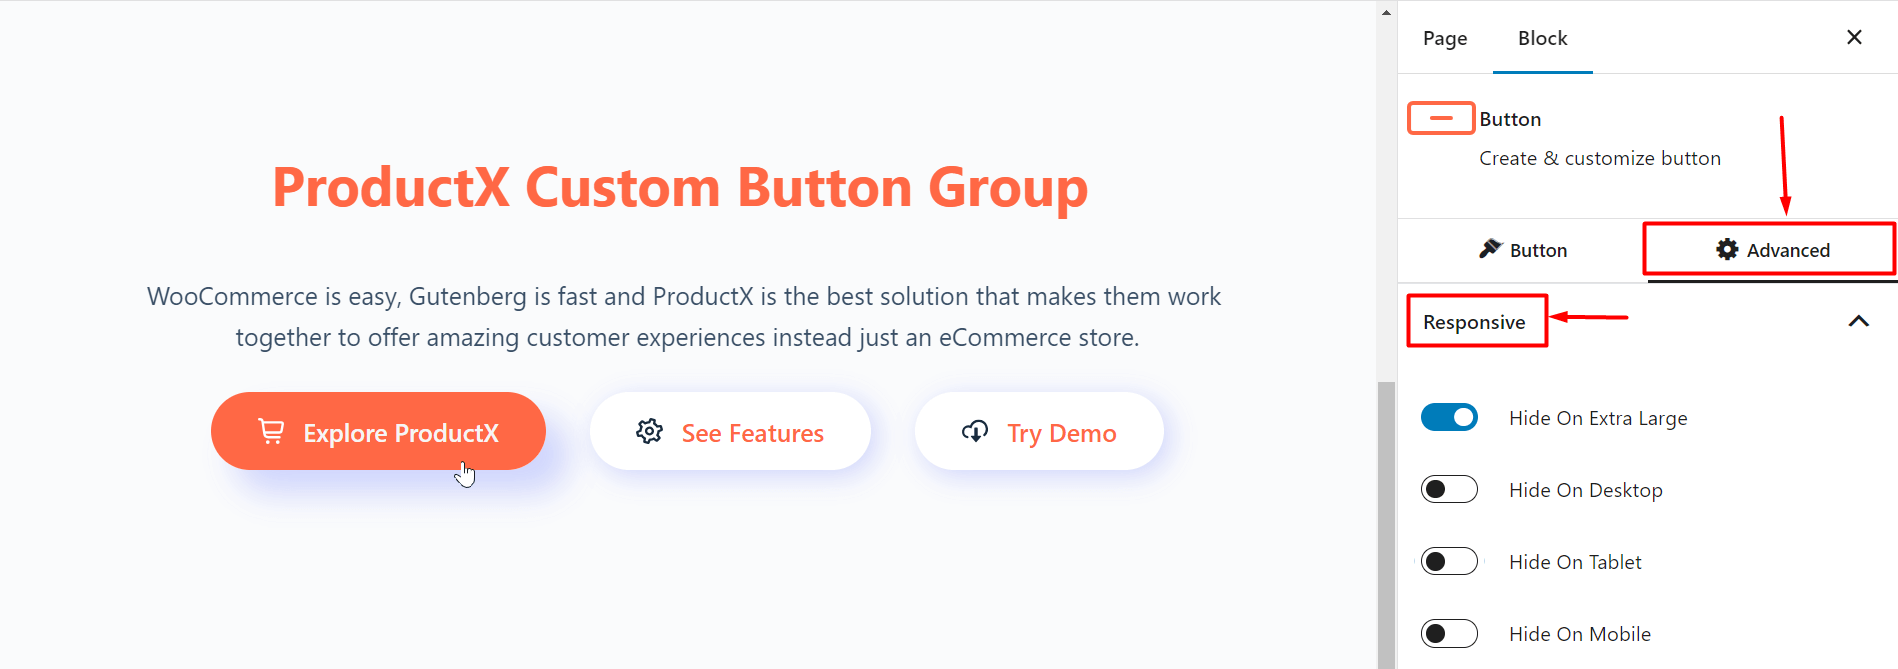 Button group responsiveness settings 